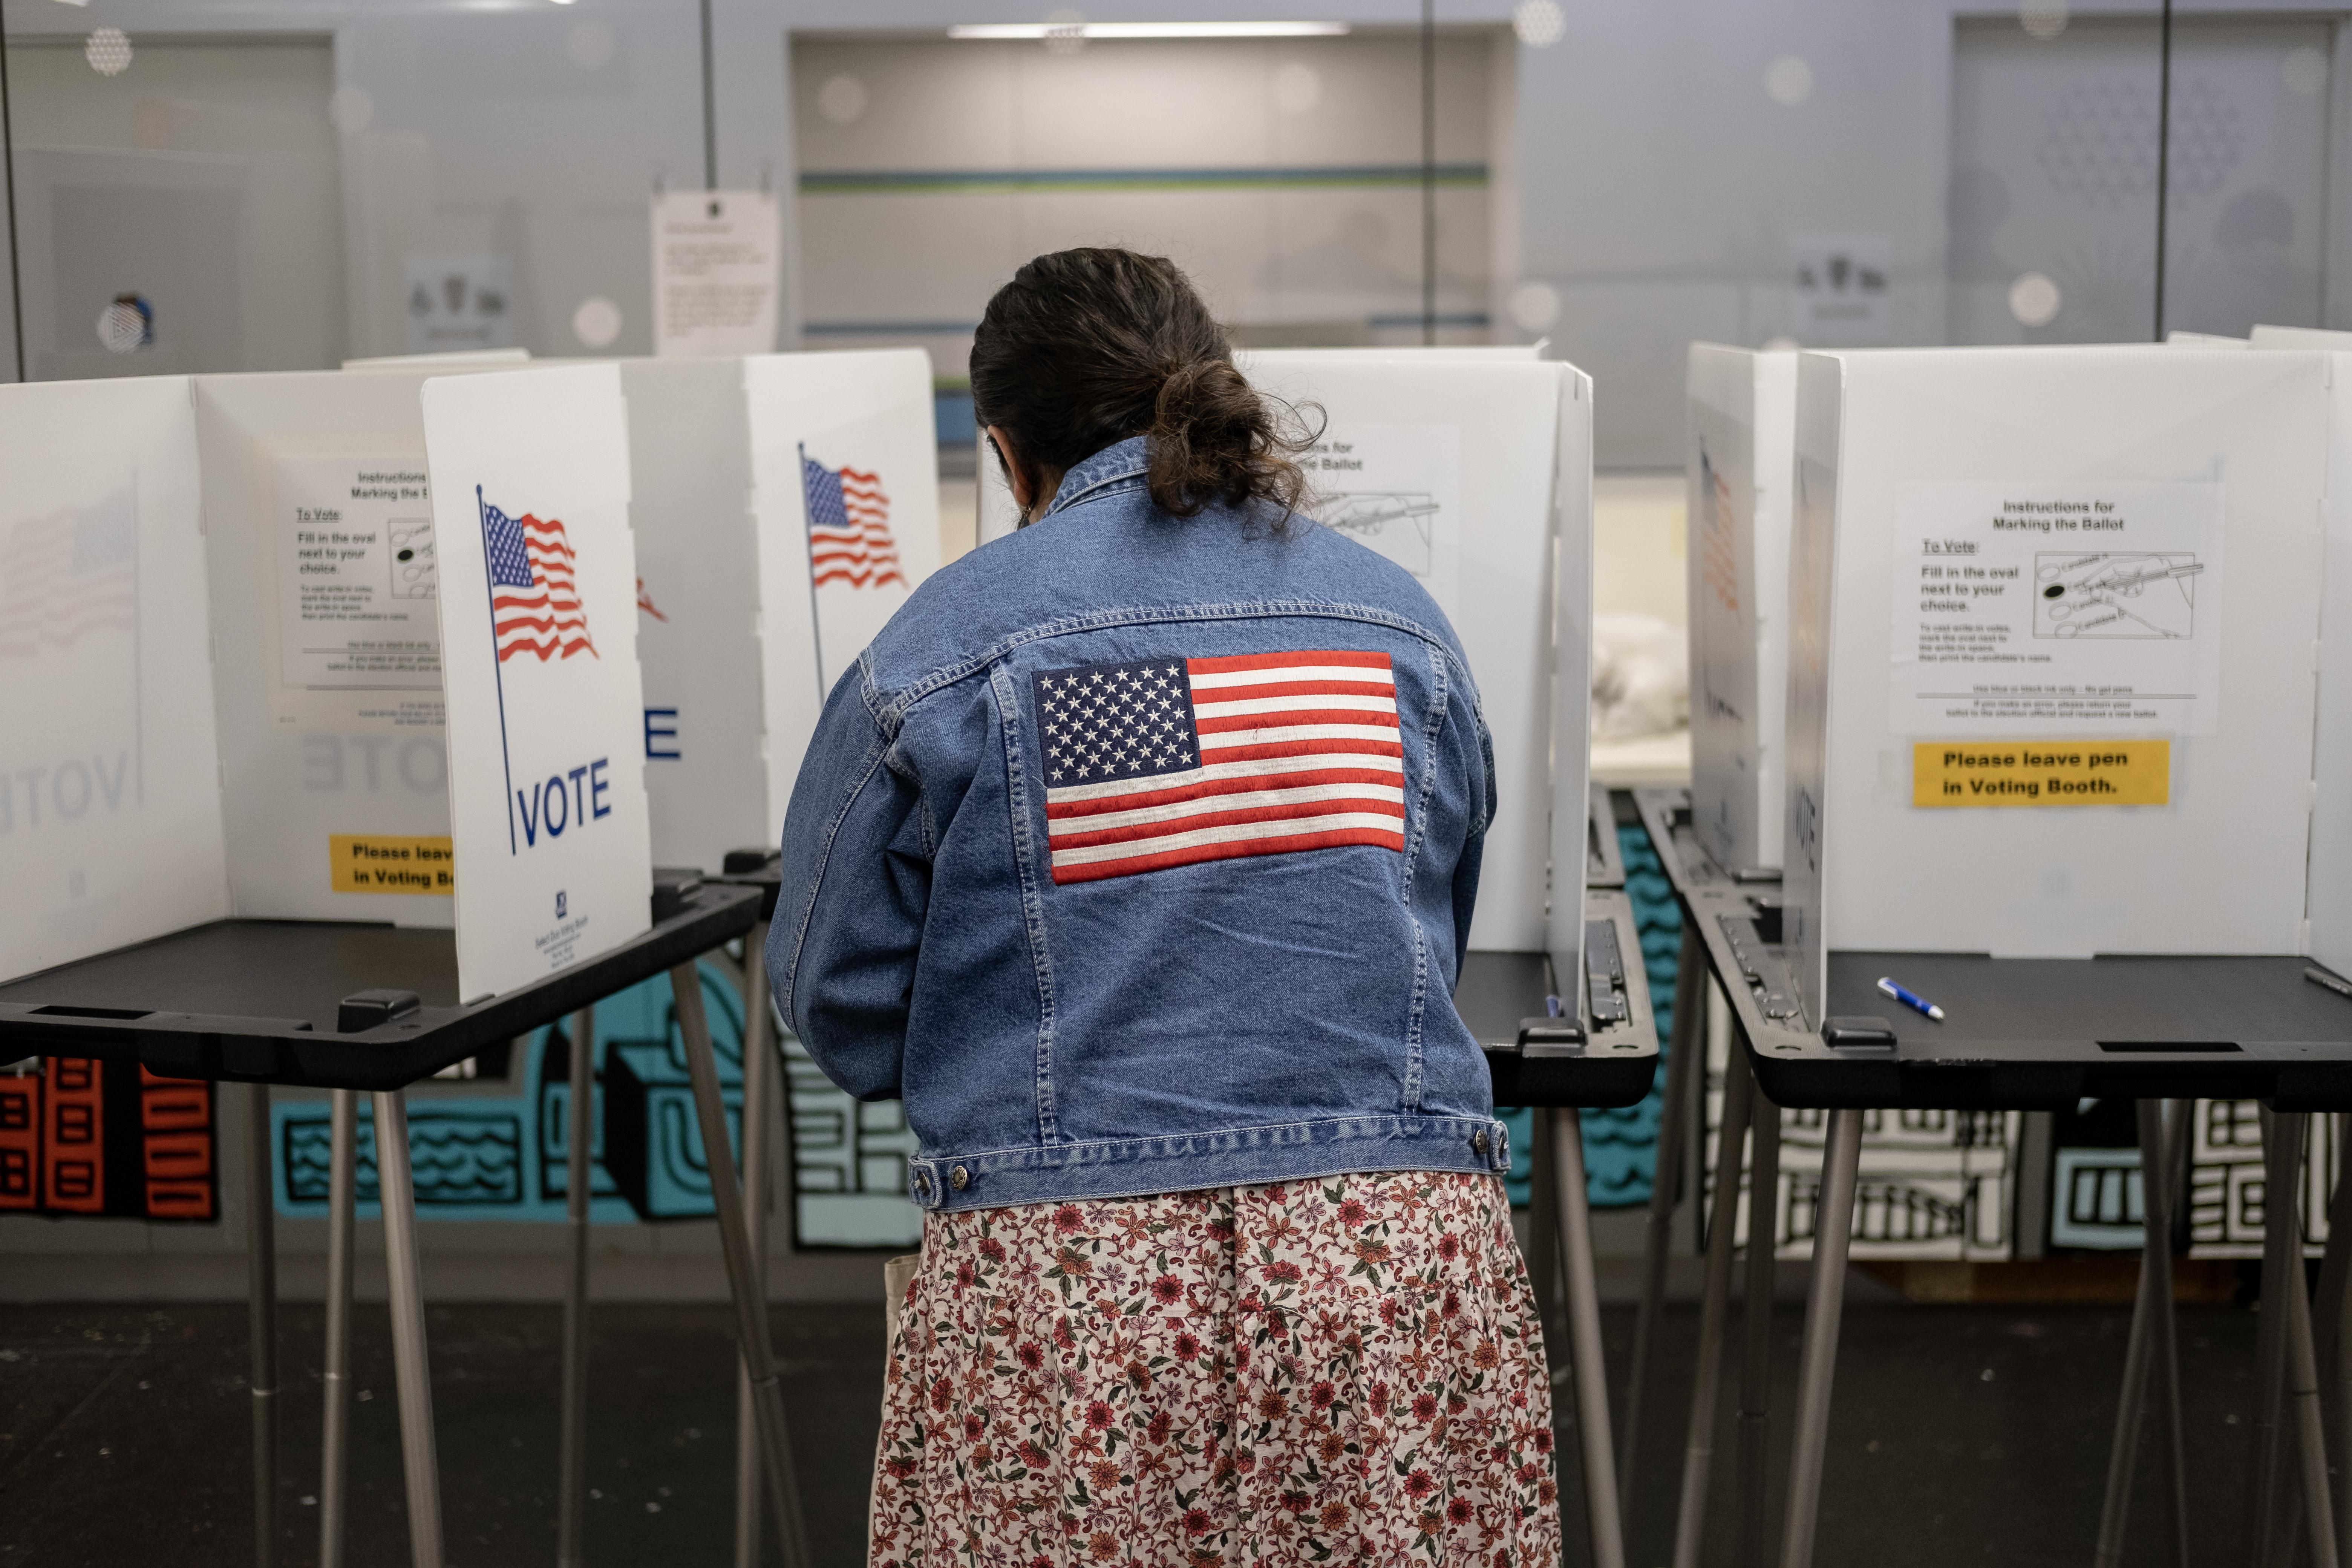 A woman wearing a dress and a jean jacket with an American flag on her back casts her ballot.